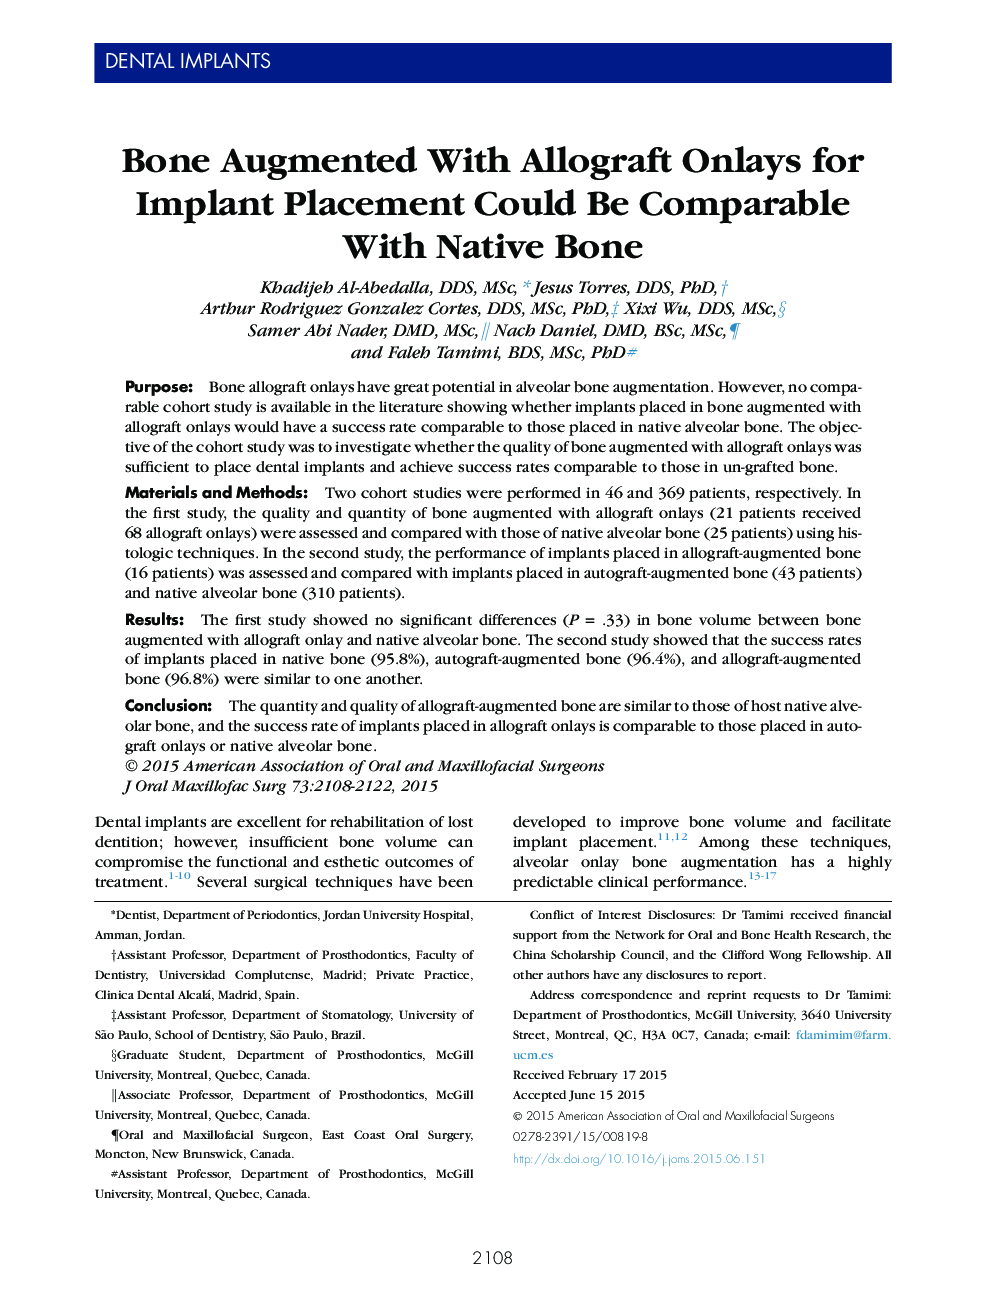 Bone Augmented With Allograft Onlays for Implant Placement Could Be Comparable With Native Bone 